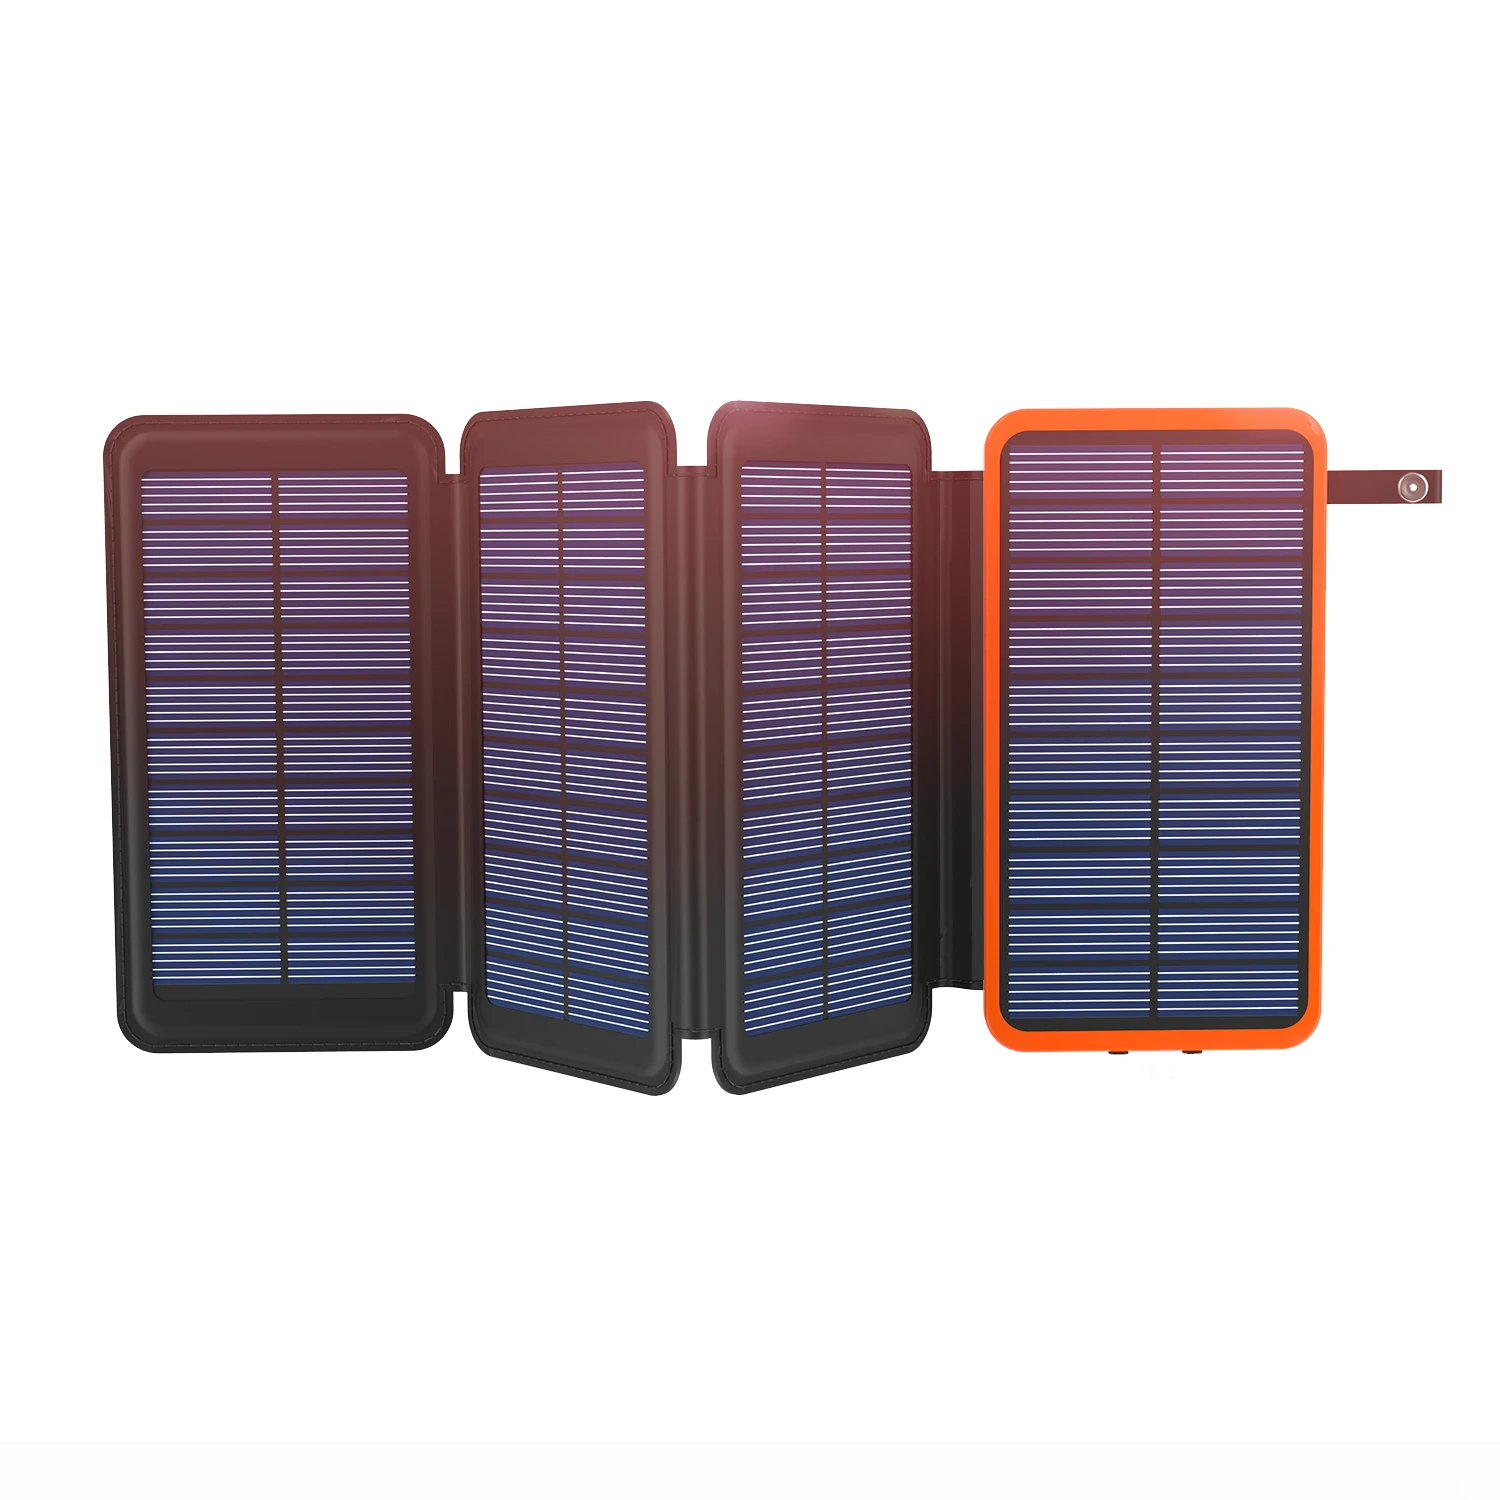 Solar energy solar phone charger power bank FULL 80000mAh portable large capacity portable power bank charger